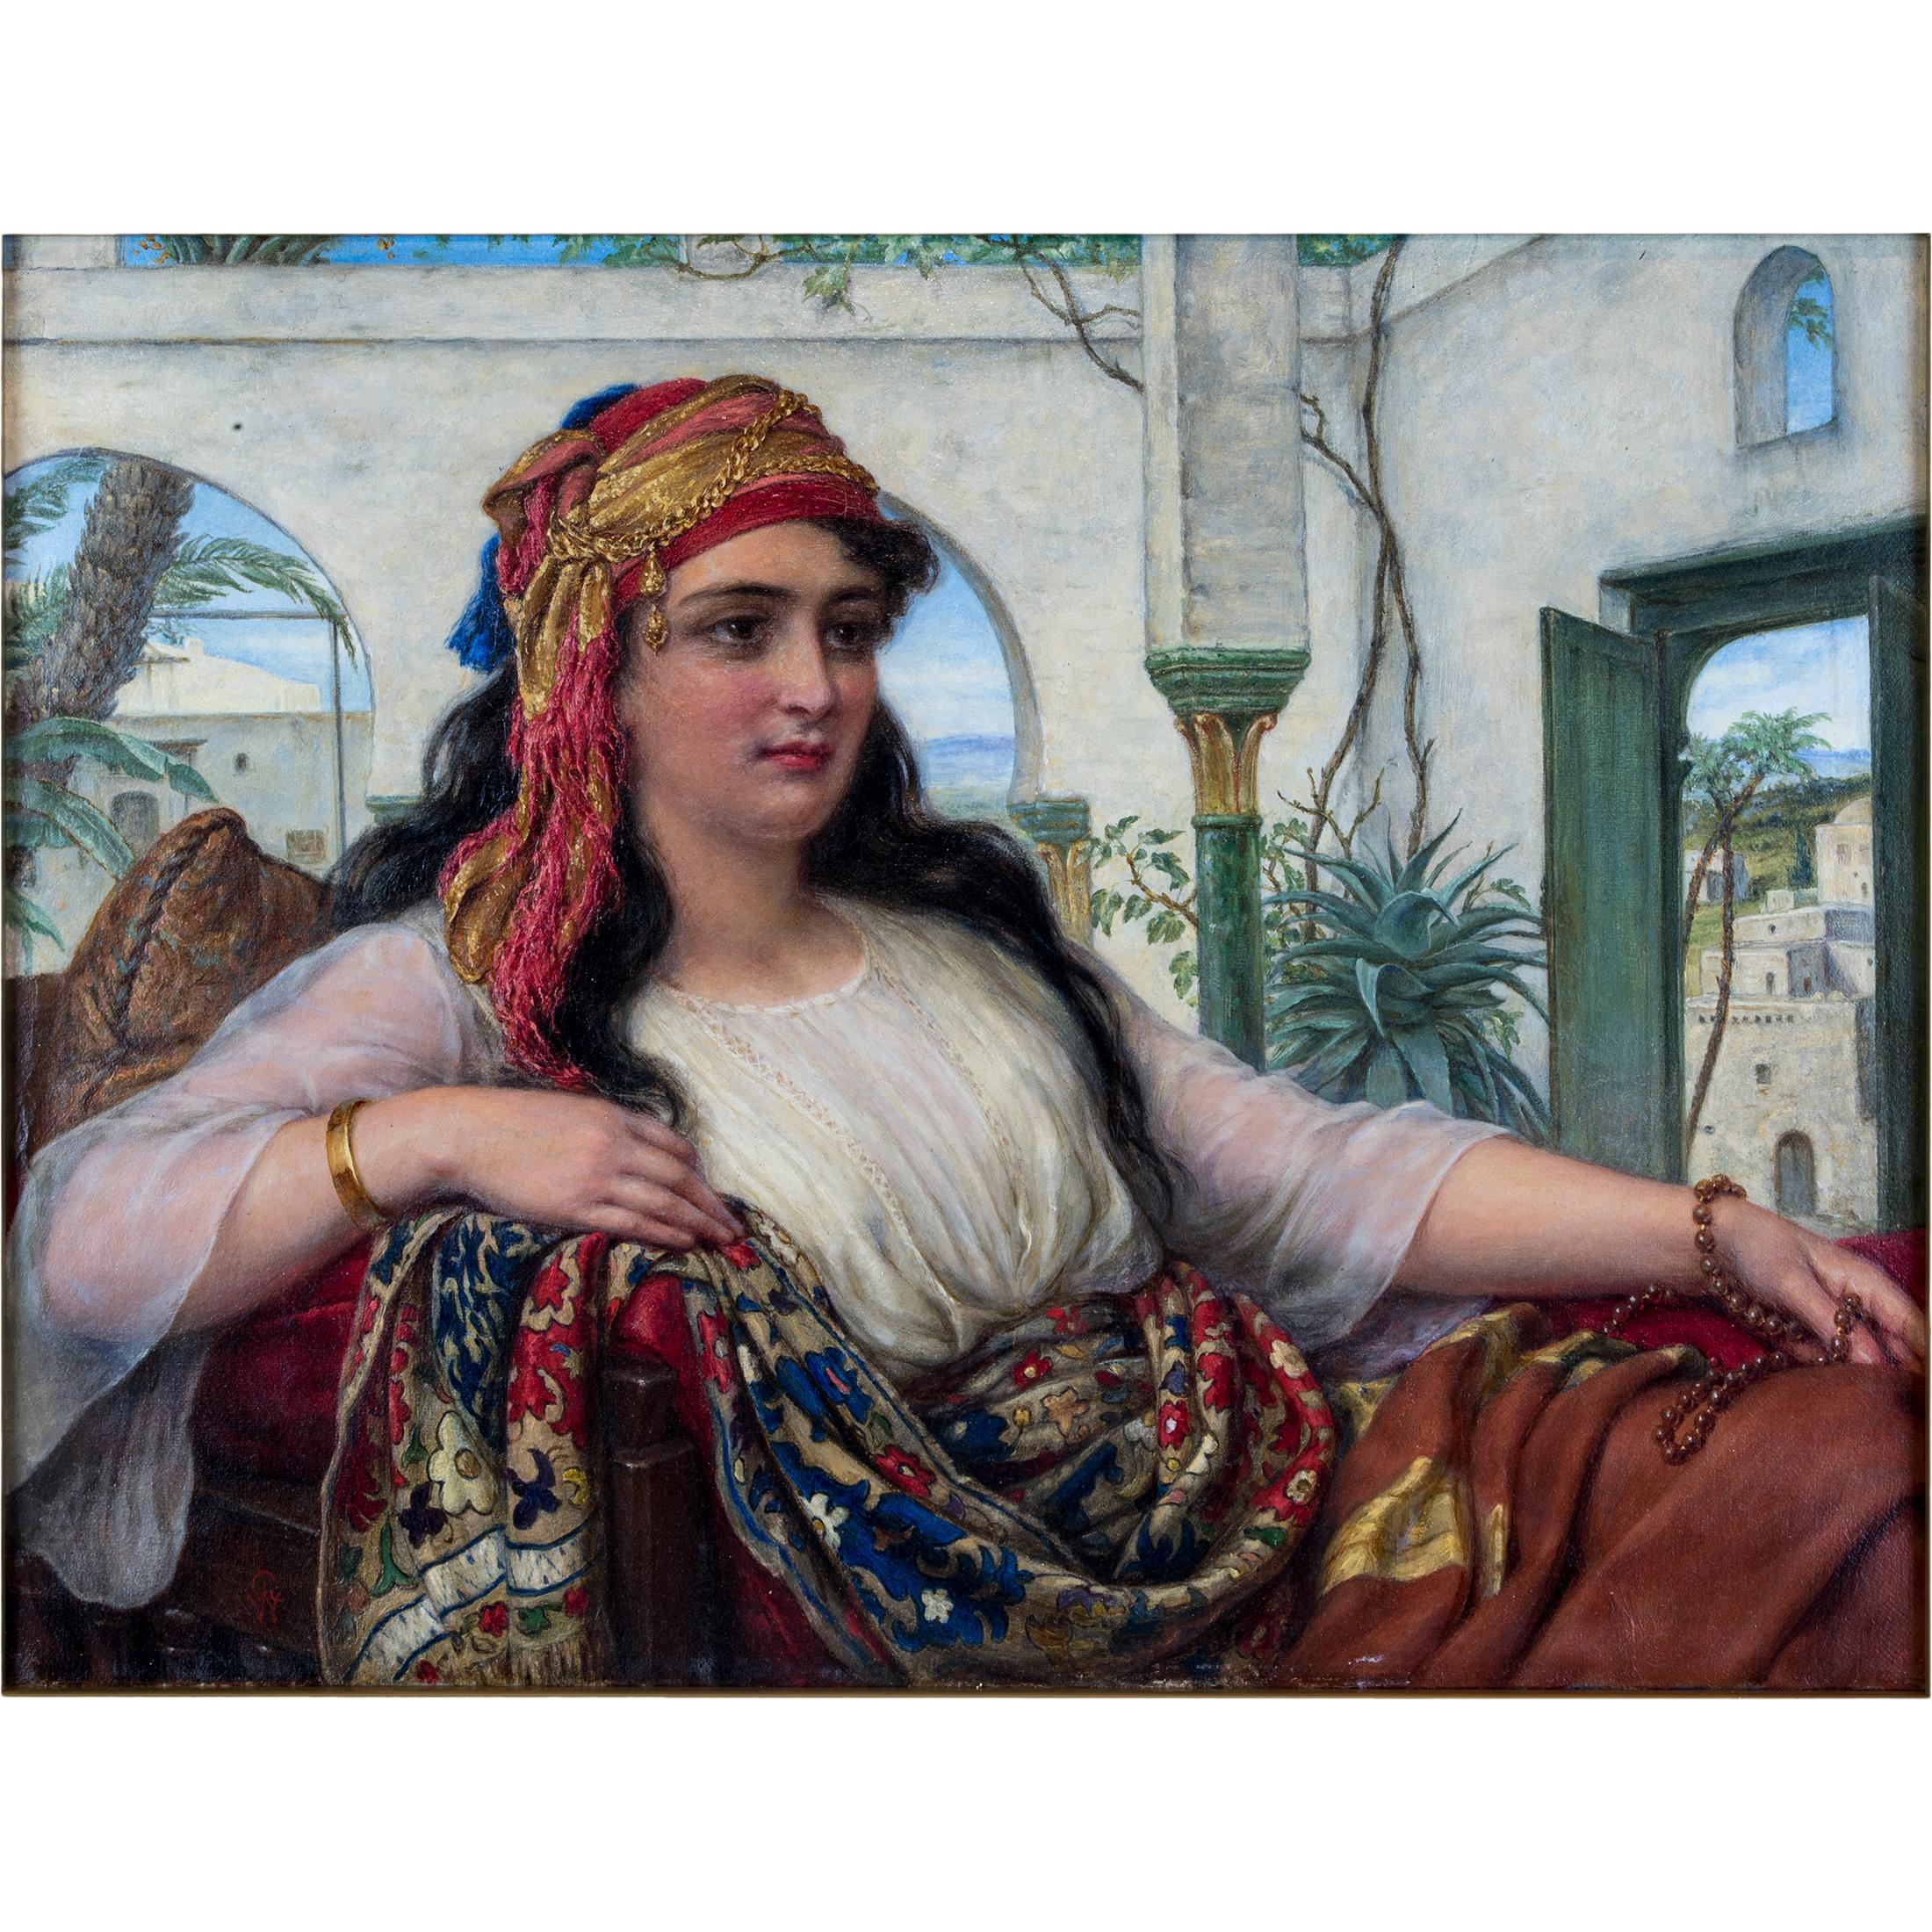 Original orientalist oil painting of a reclining harem beauty by William Gale

Artist: William Gale (British, 1823-1909)
signed with artist monogram 'WG' (L/L)
Medium: oil on canvas
Size: 12 in x 16 1/8 in.; (framed) 20 1/2 in. x 24 1/2 in.